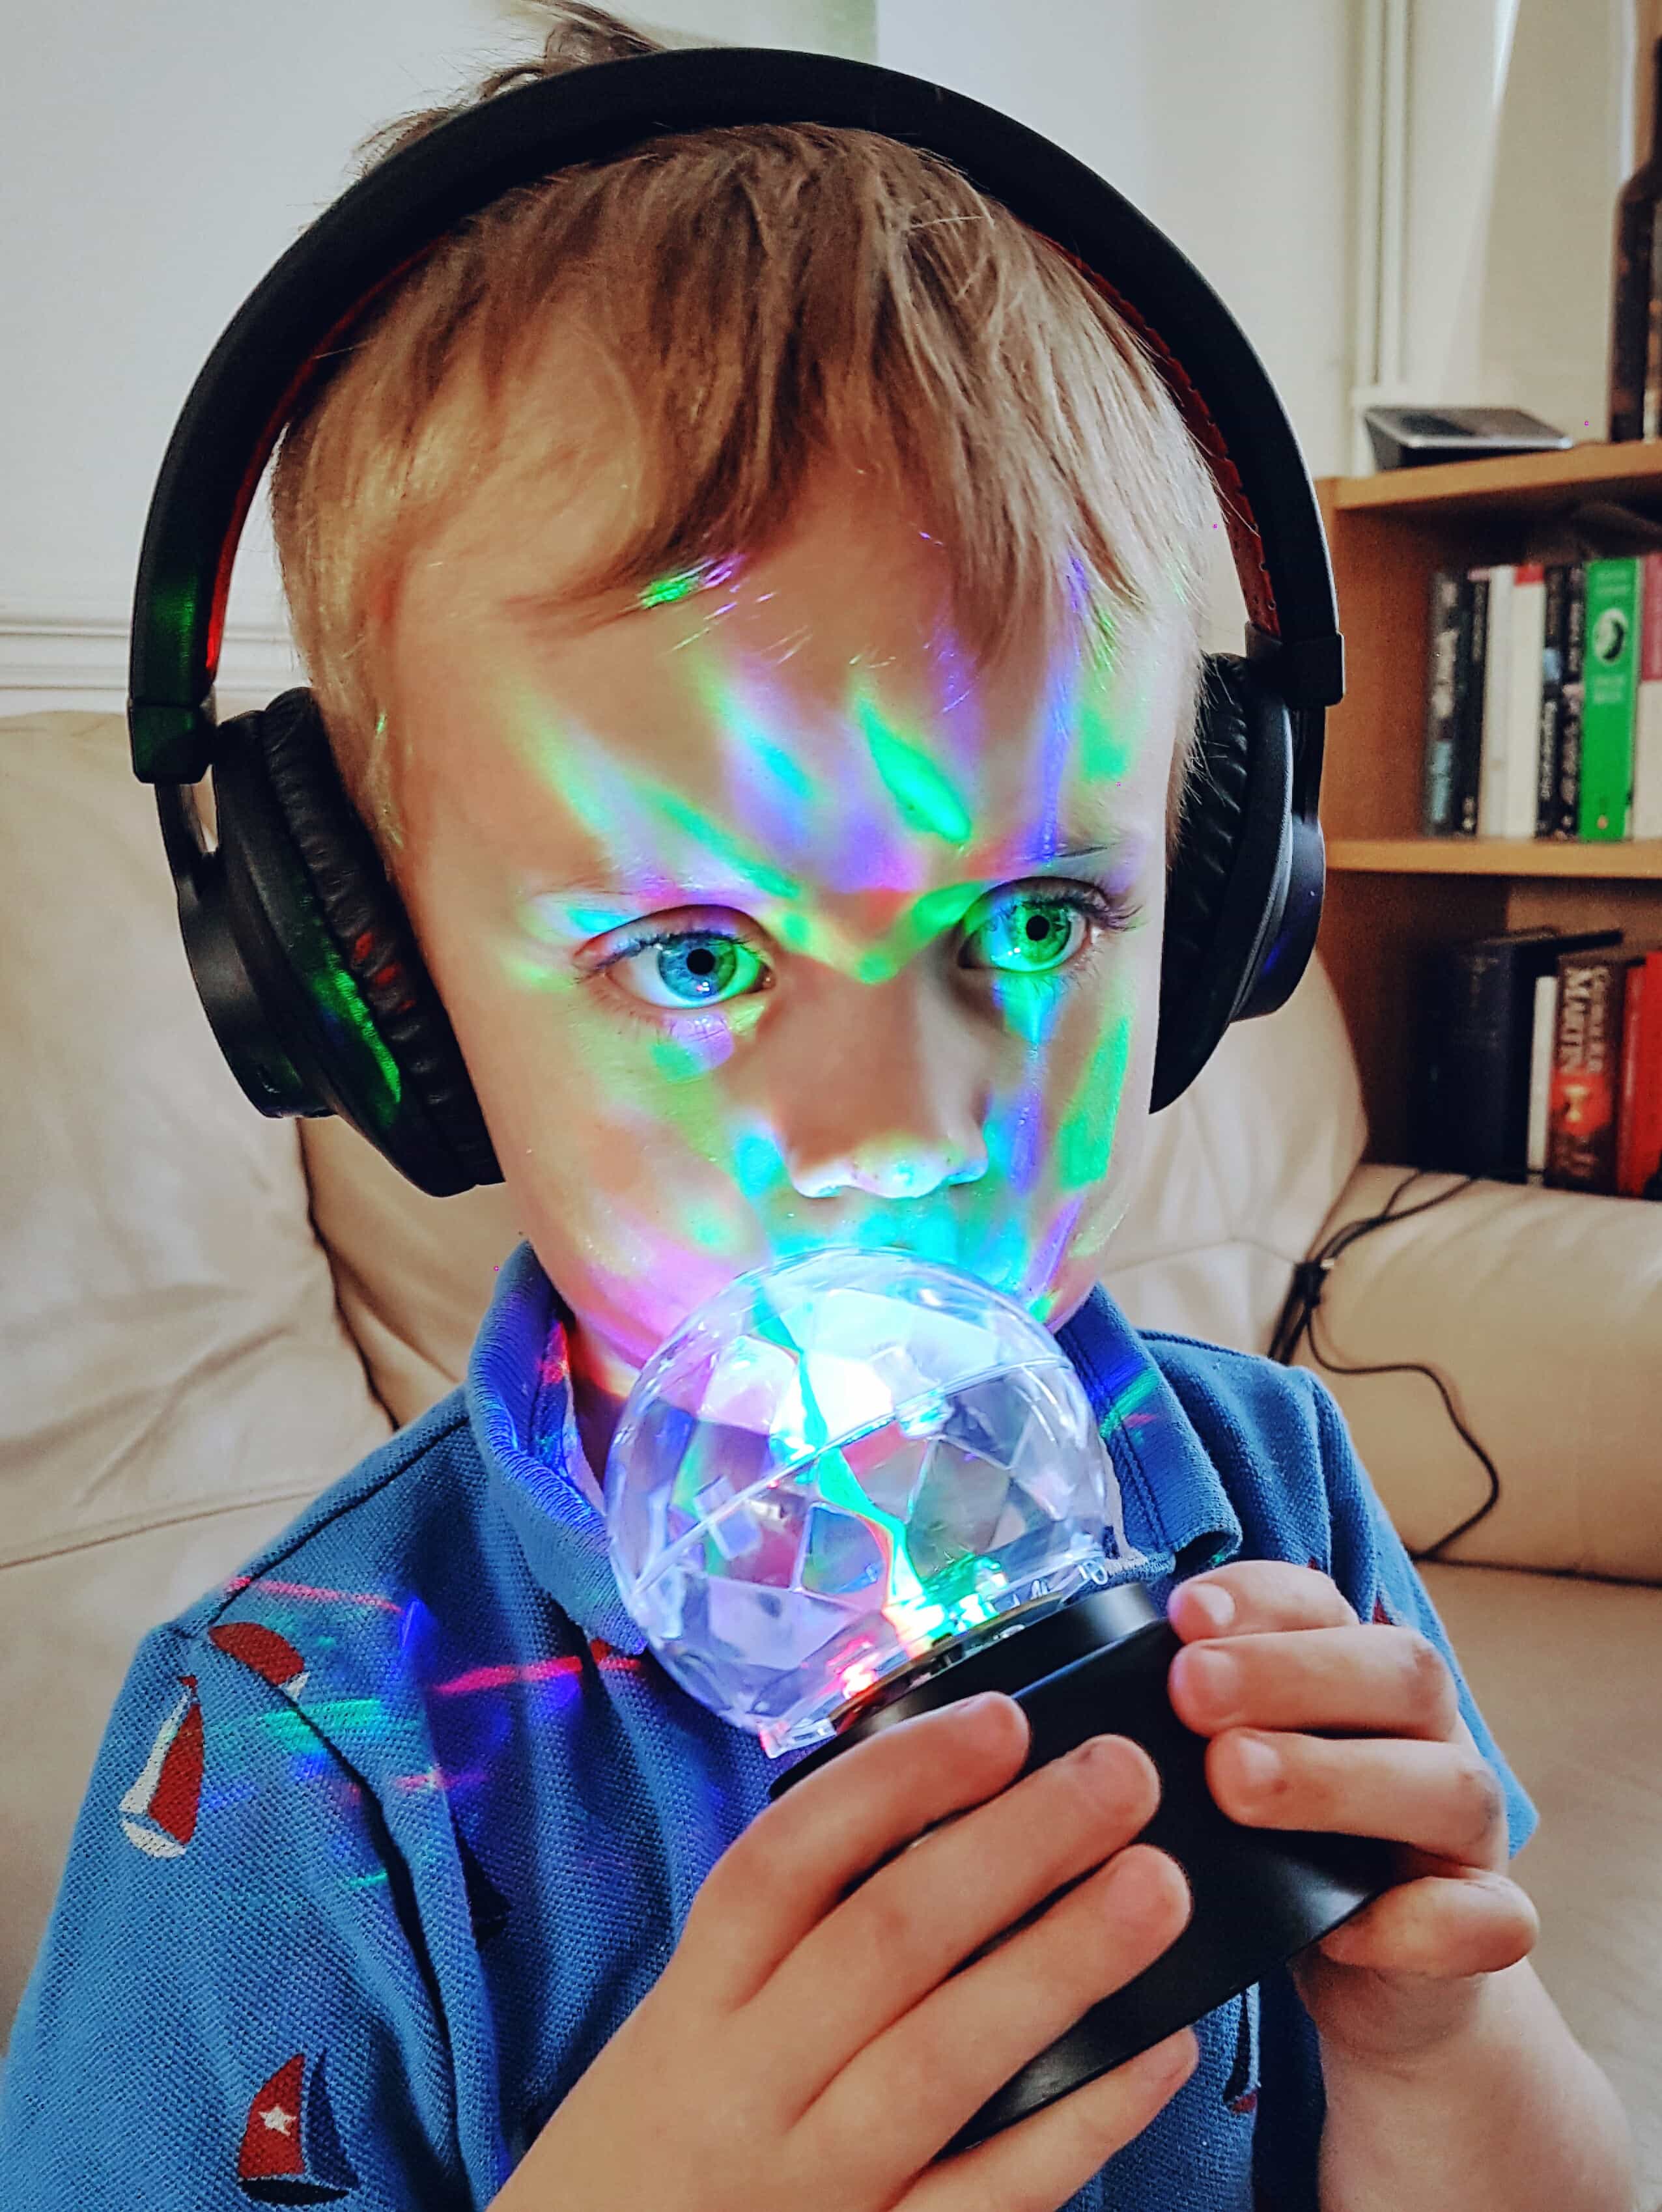 Boy with Bluetooth headphones and sensory toys which make good gifts for autistic children. Photo by Someone's Mum.